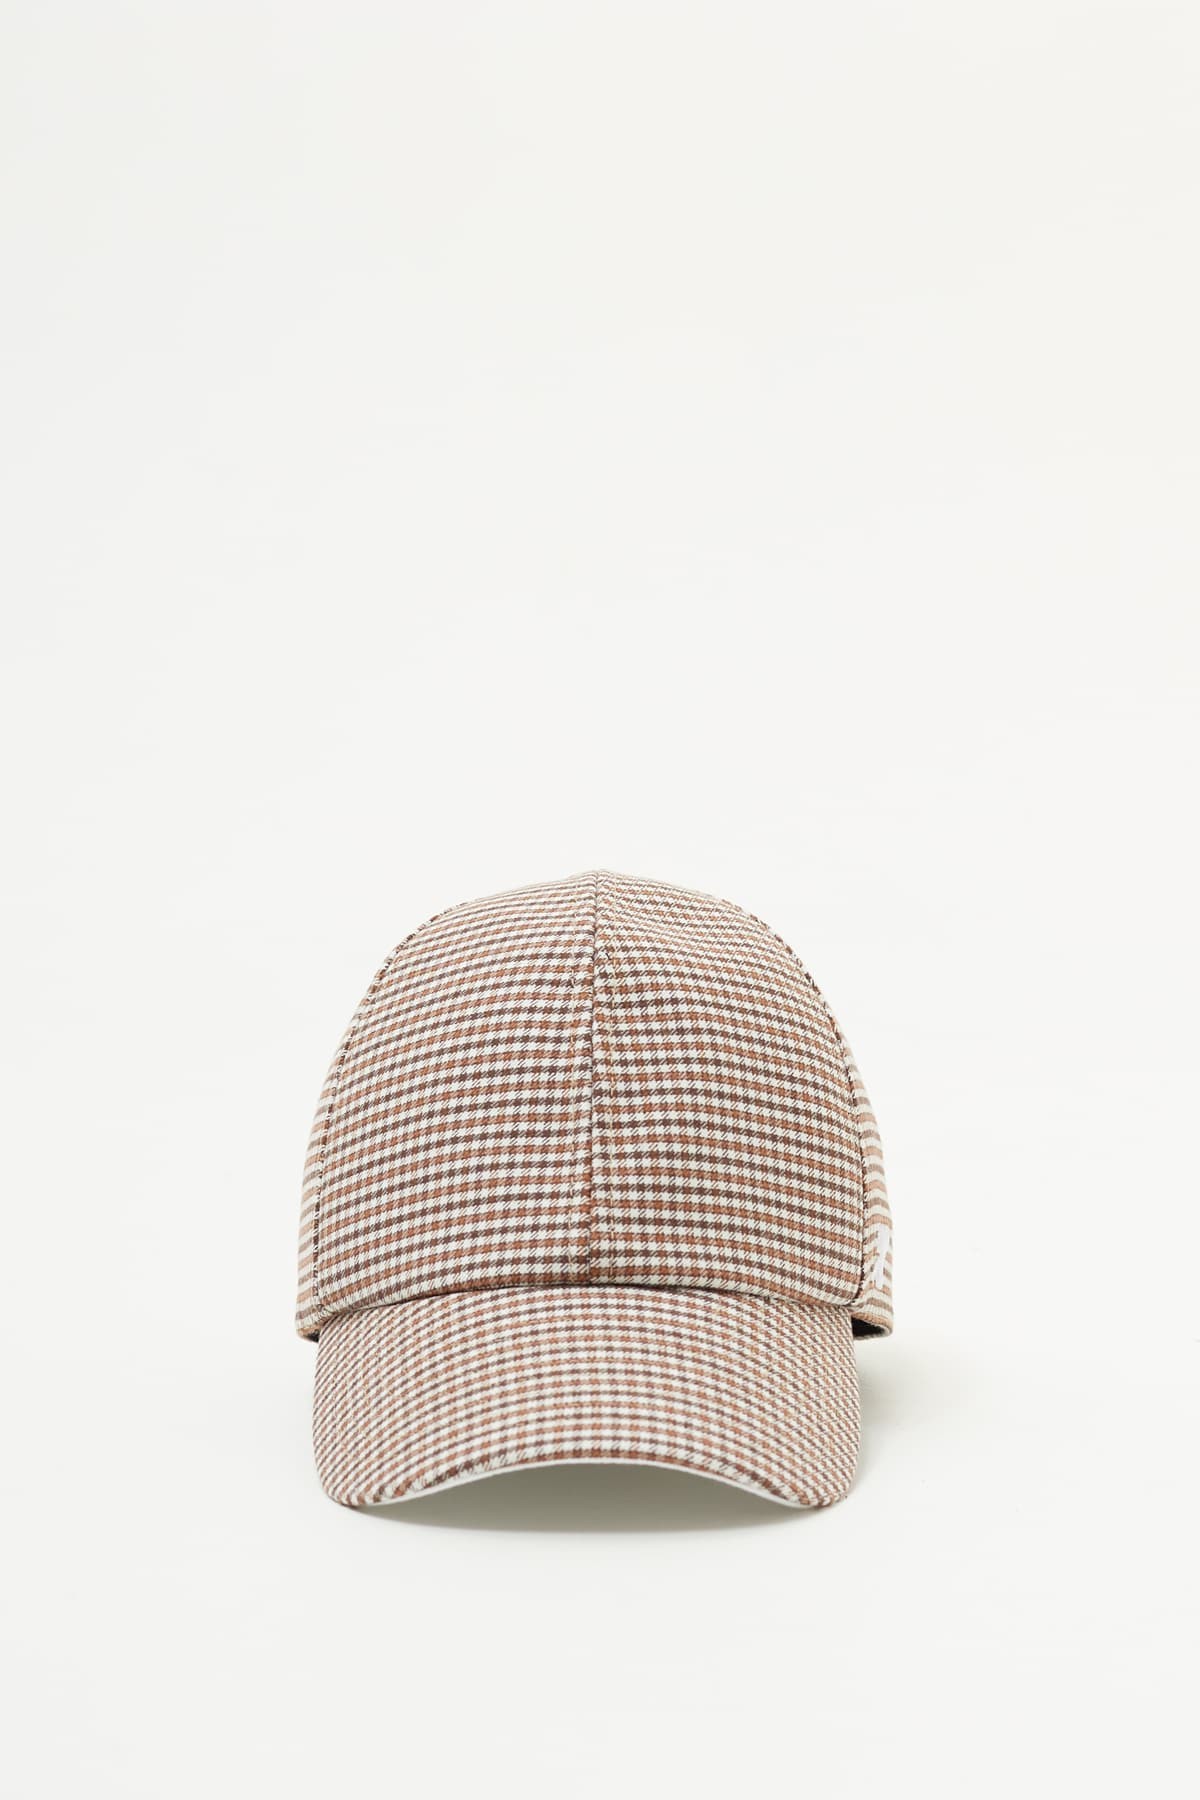 COURREGES BROWN WHITE GOGO CHECKED WOOL CAP IAMNUE